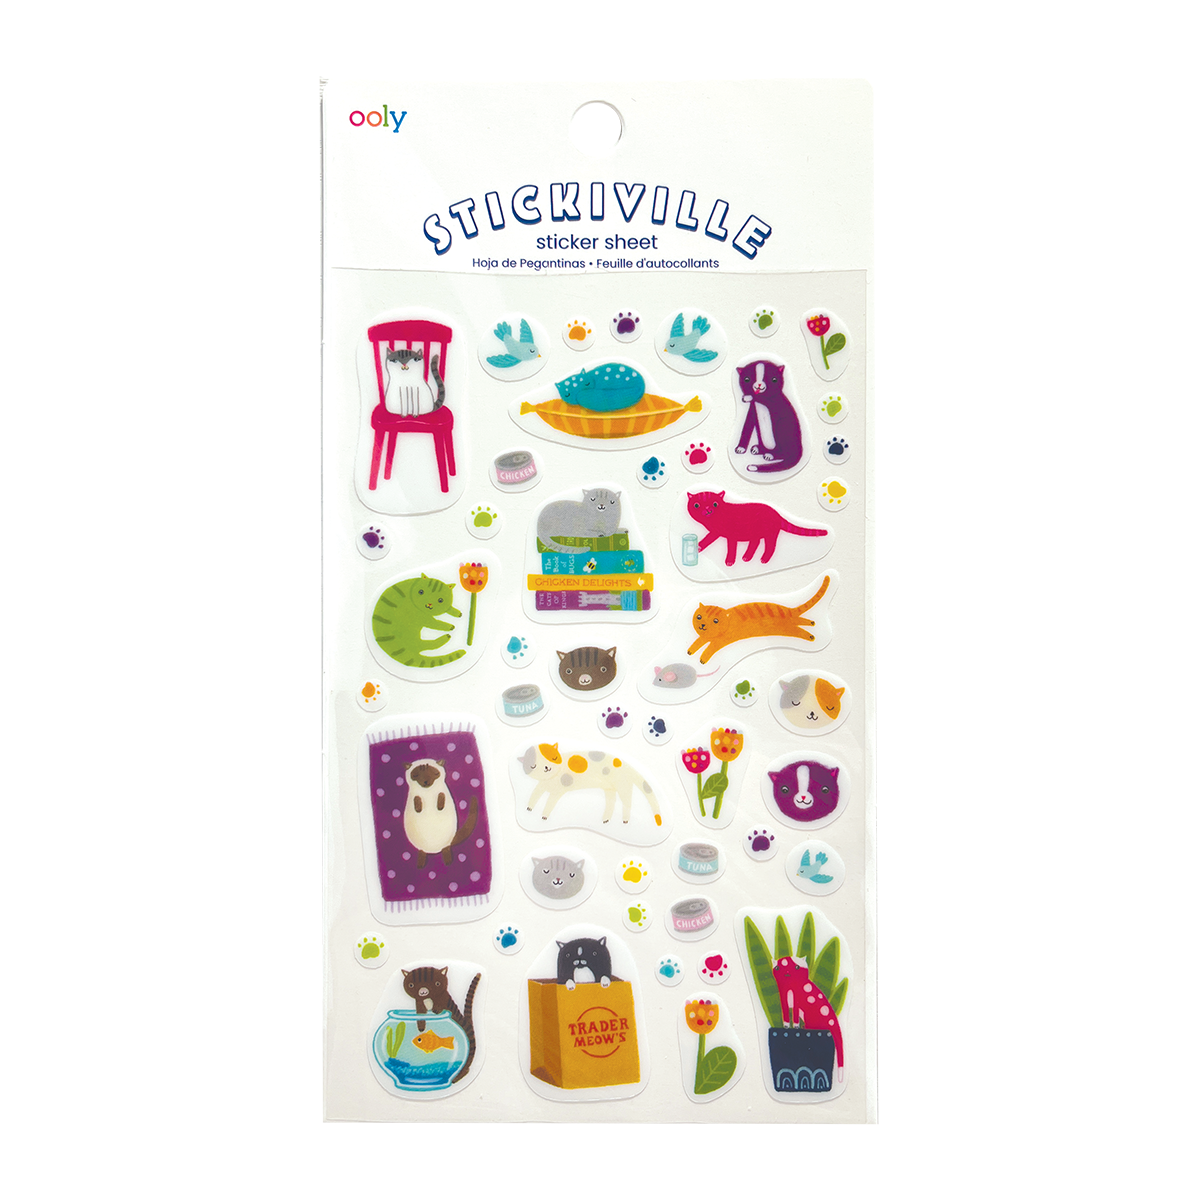 OOLY Stickiville Quirky Cats Stickers inside packaging